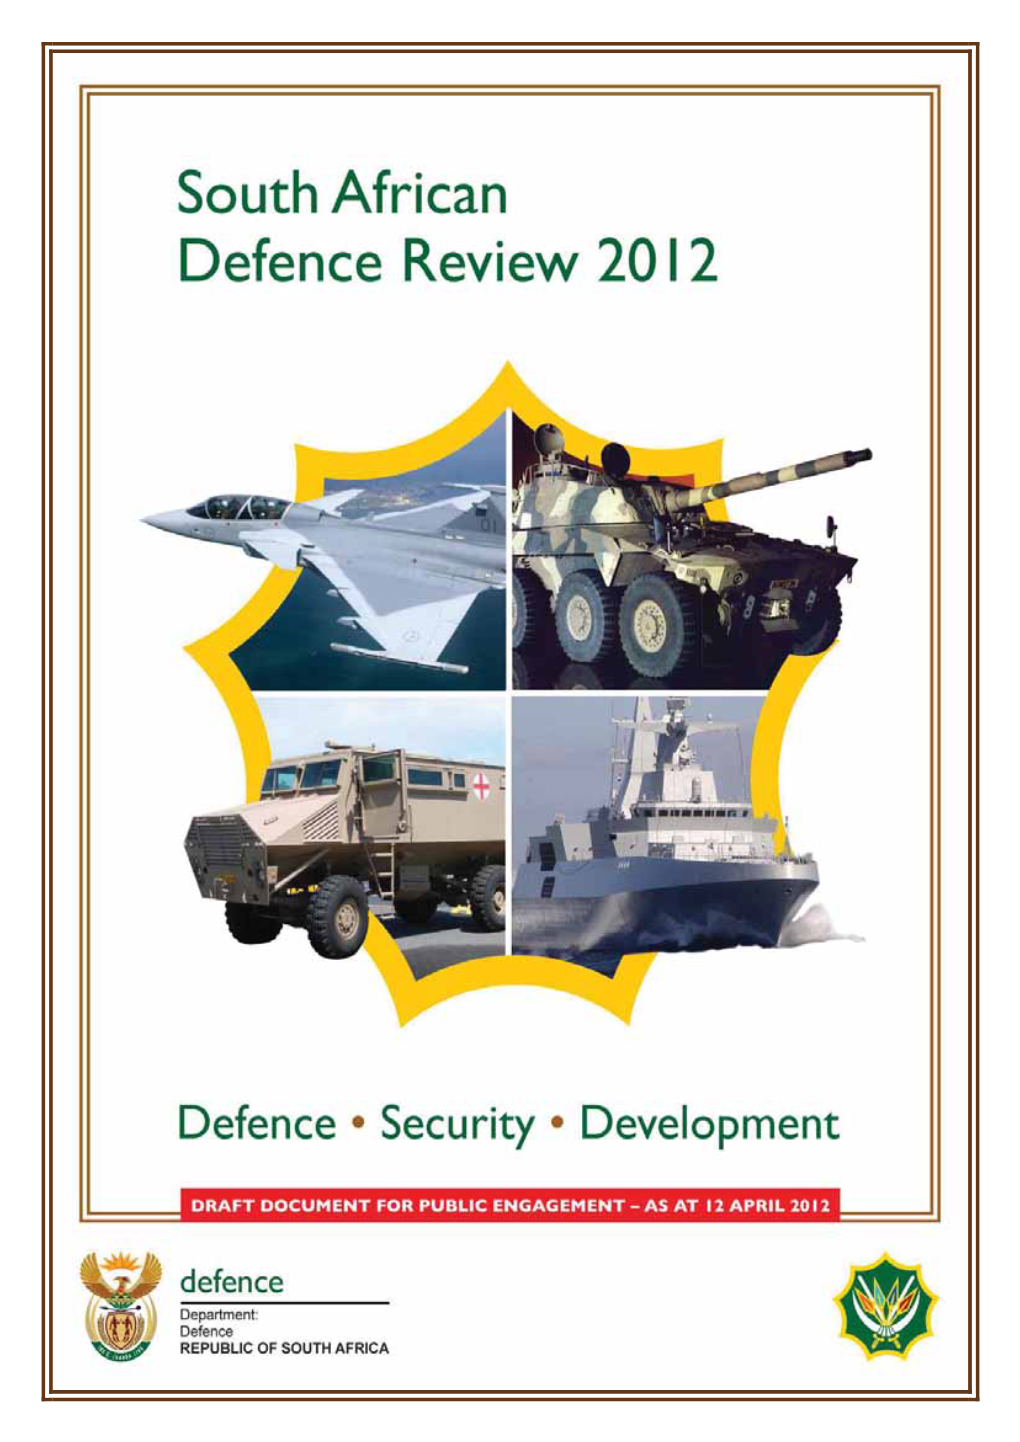 South African Defence Review 2012